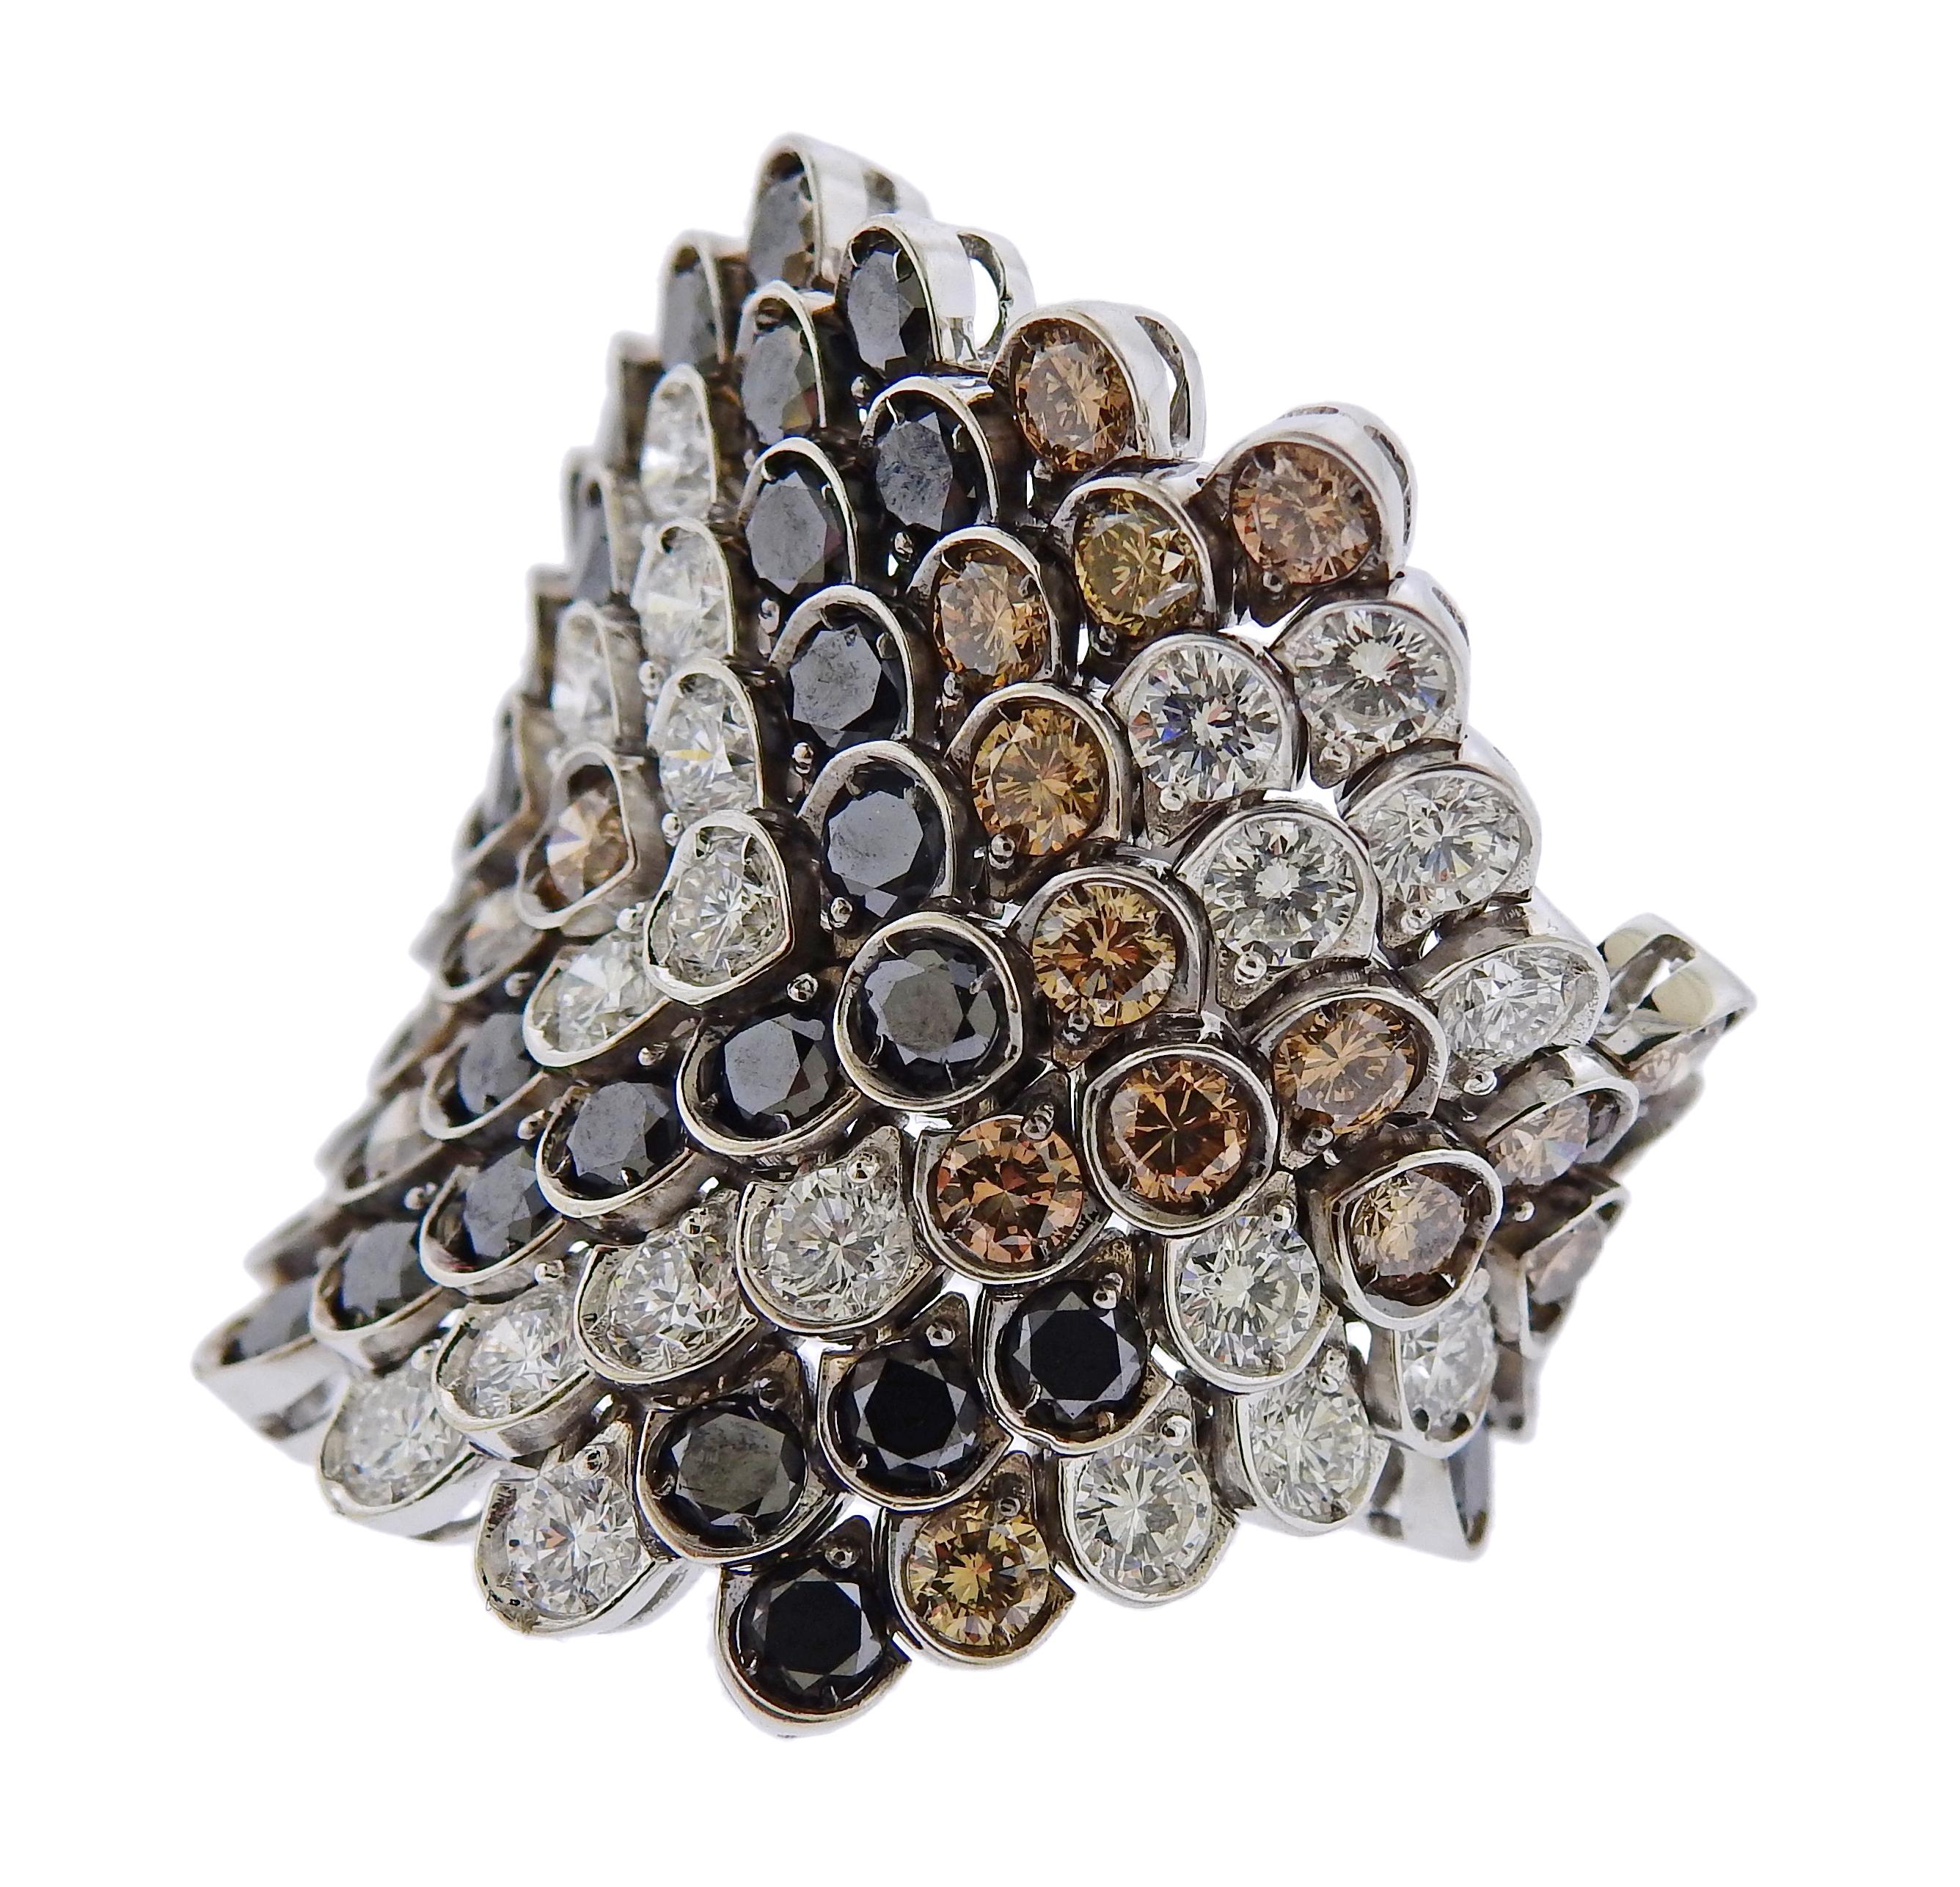 18k gold ring by Stefan Hafner, set with black, fancy brown and white diamonds - approx. 4.00ctw total. Ring size -  8, ring top is 28mm wide. Marked SH mark, 750. Weight is 14.4 grams.